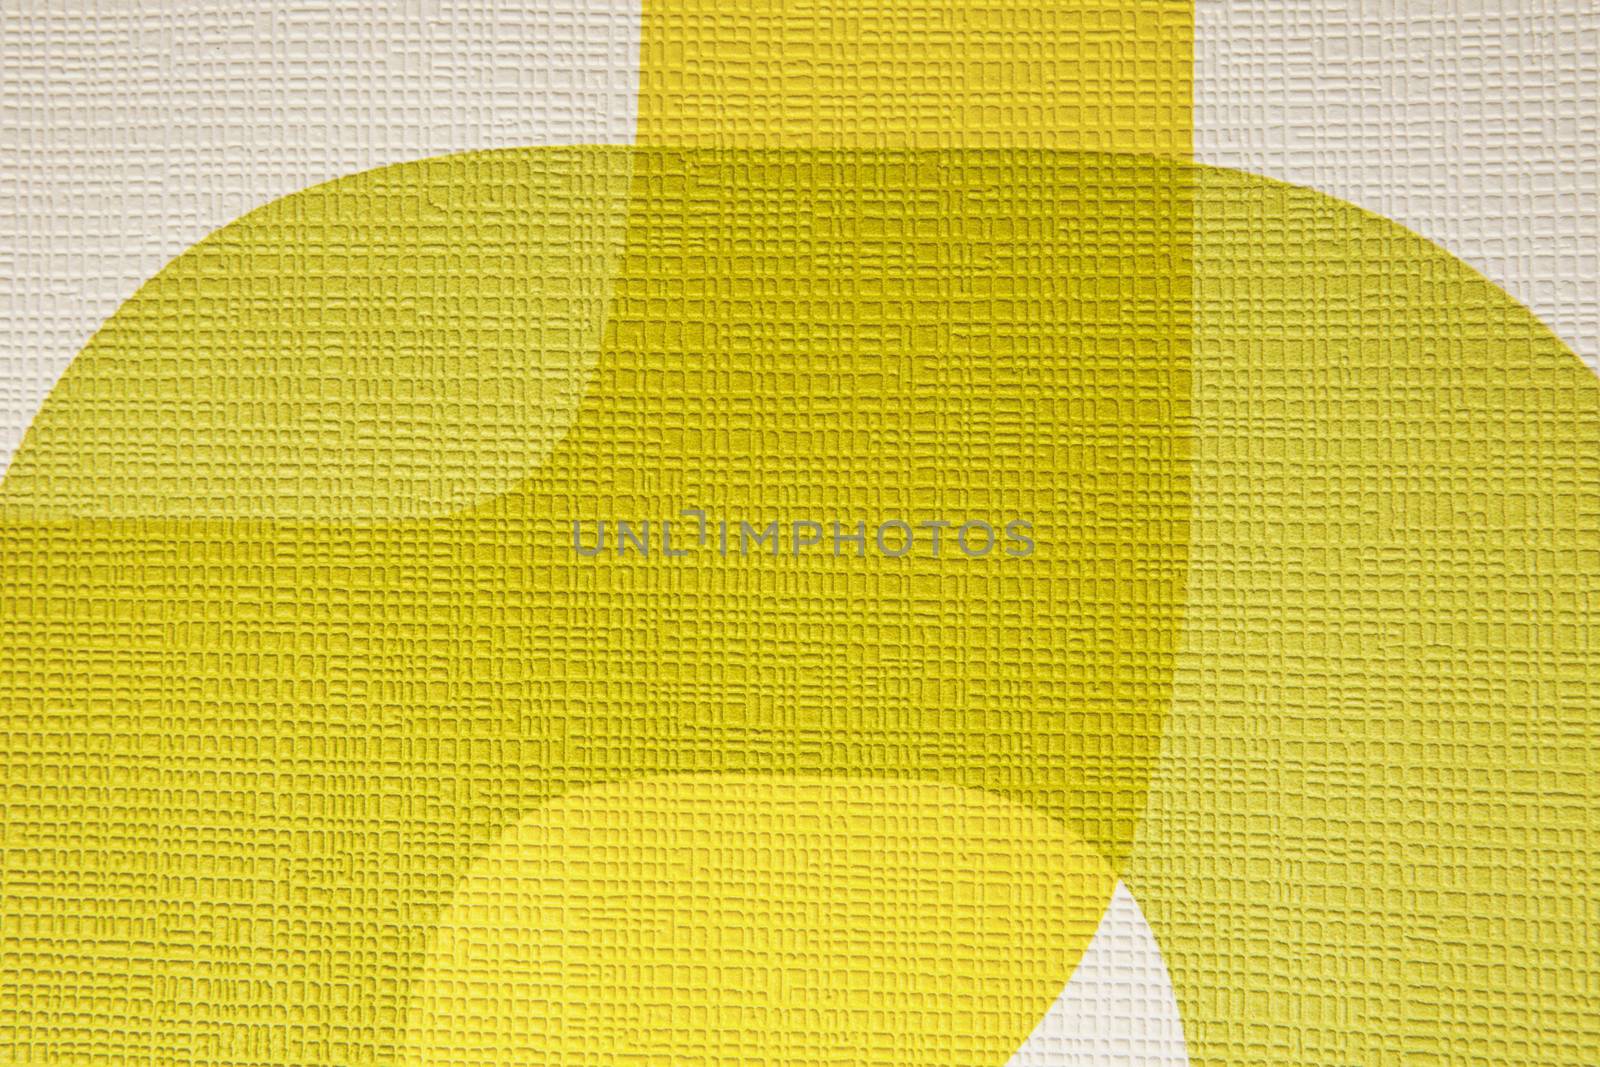 Retro funky yellow wallpaper design with texture.